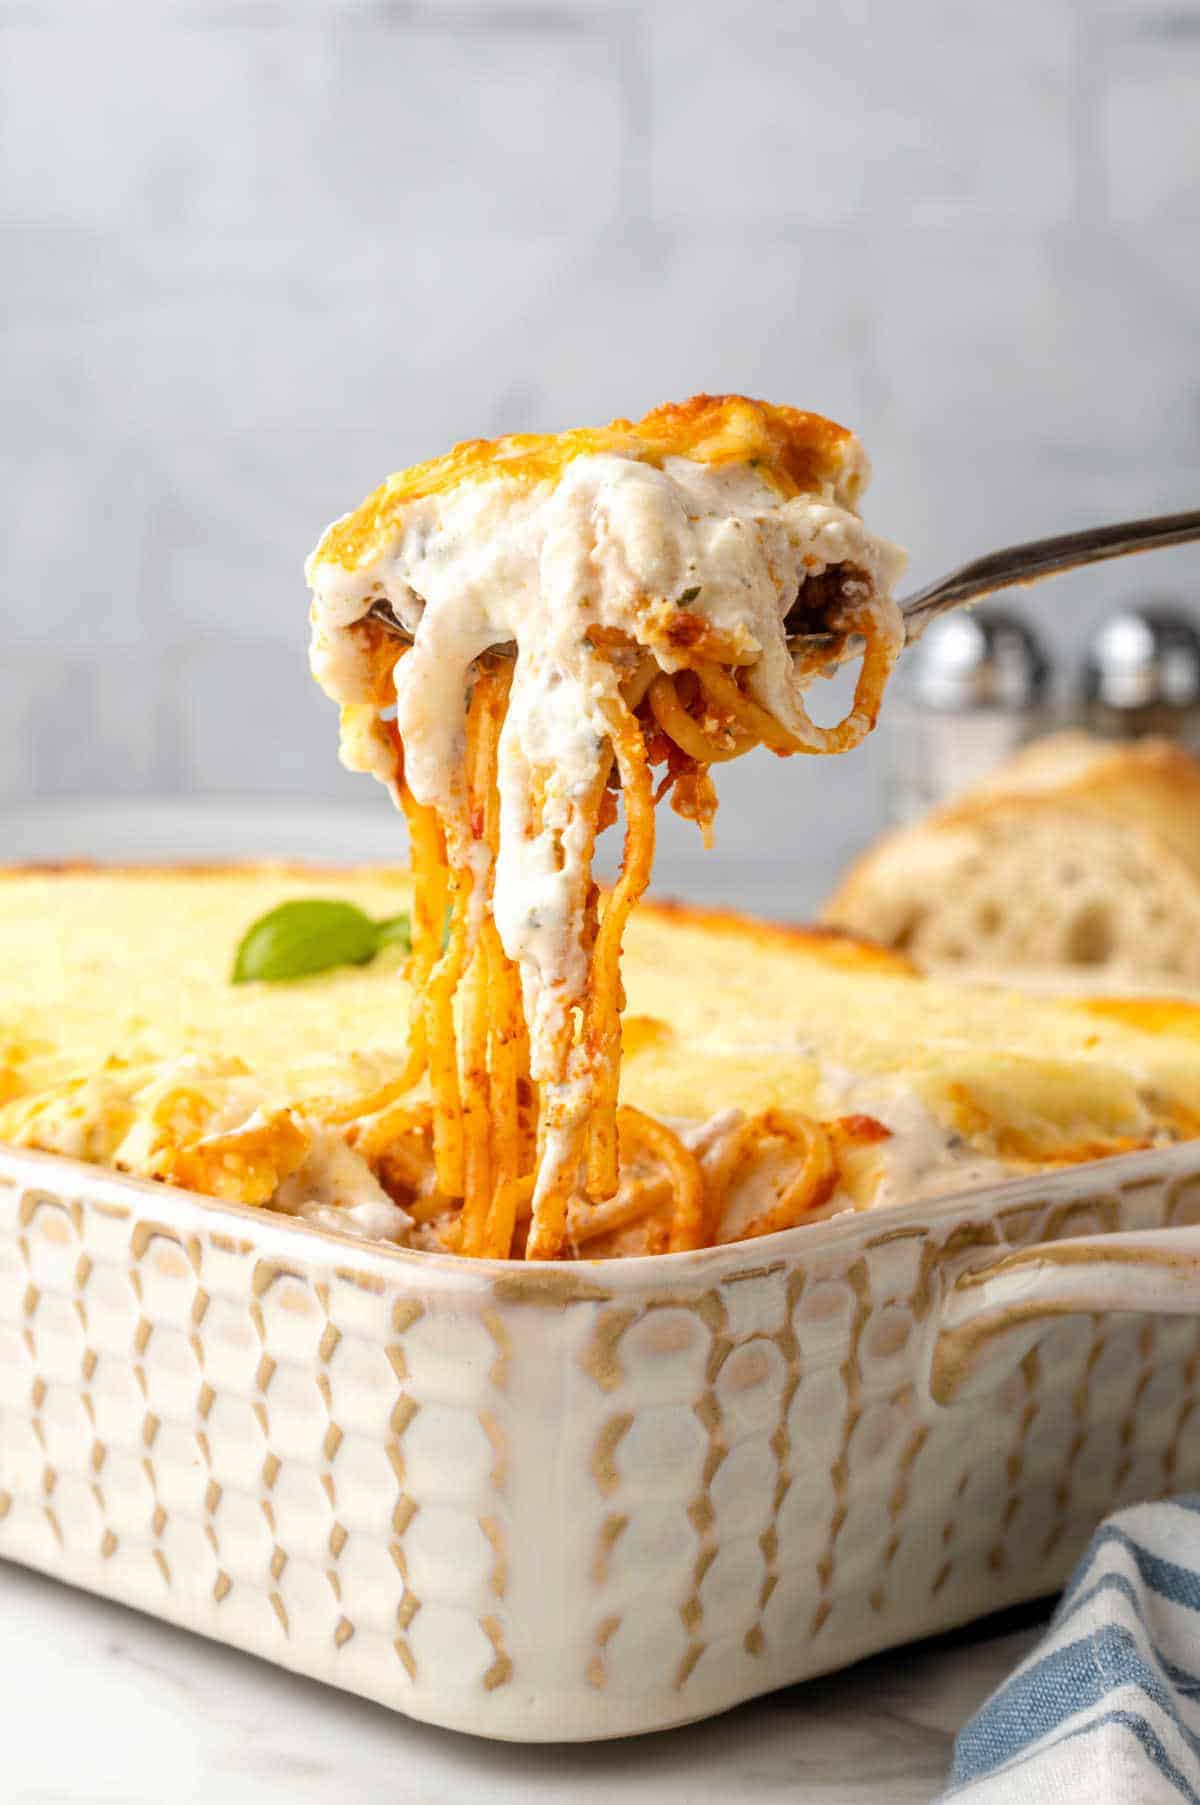 A fork full with spaghetti, sauce, and cheese over a beige casserole.